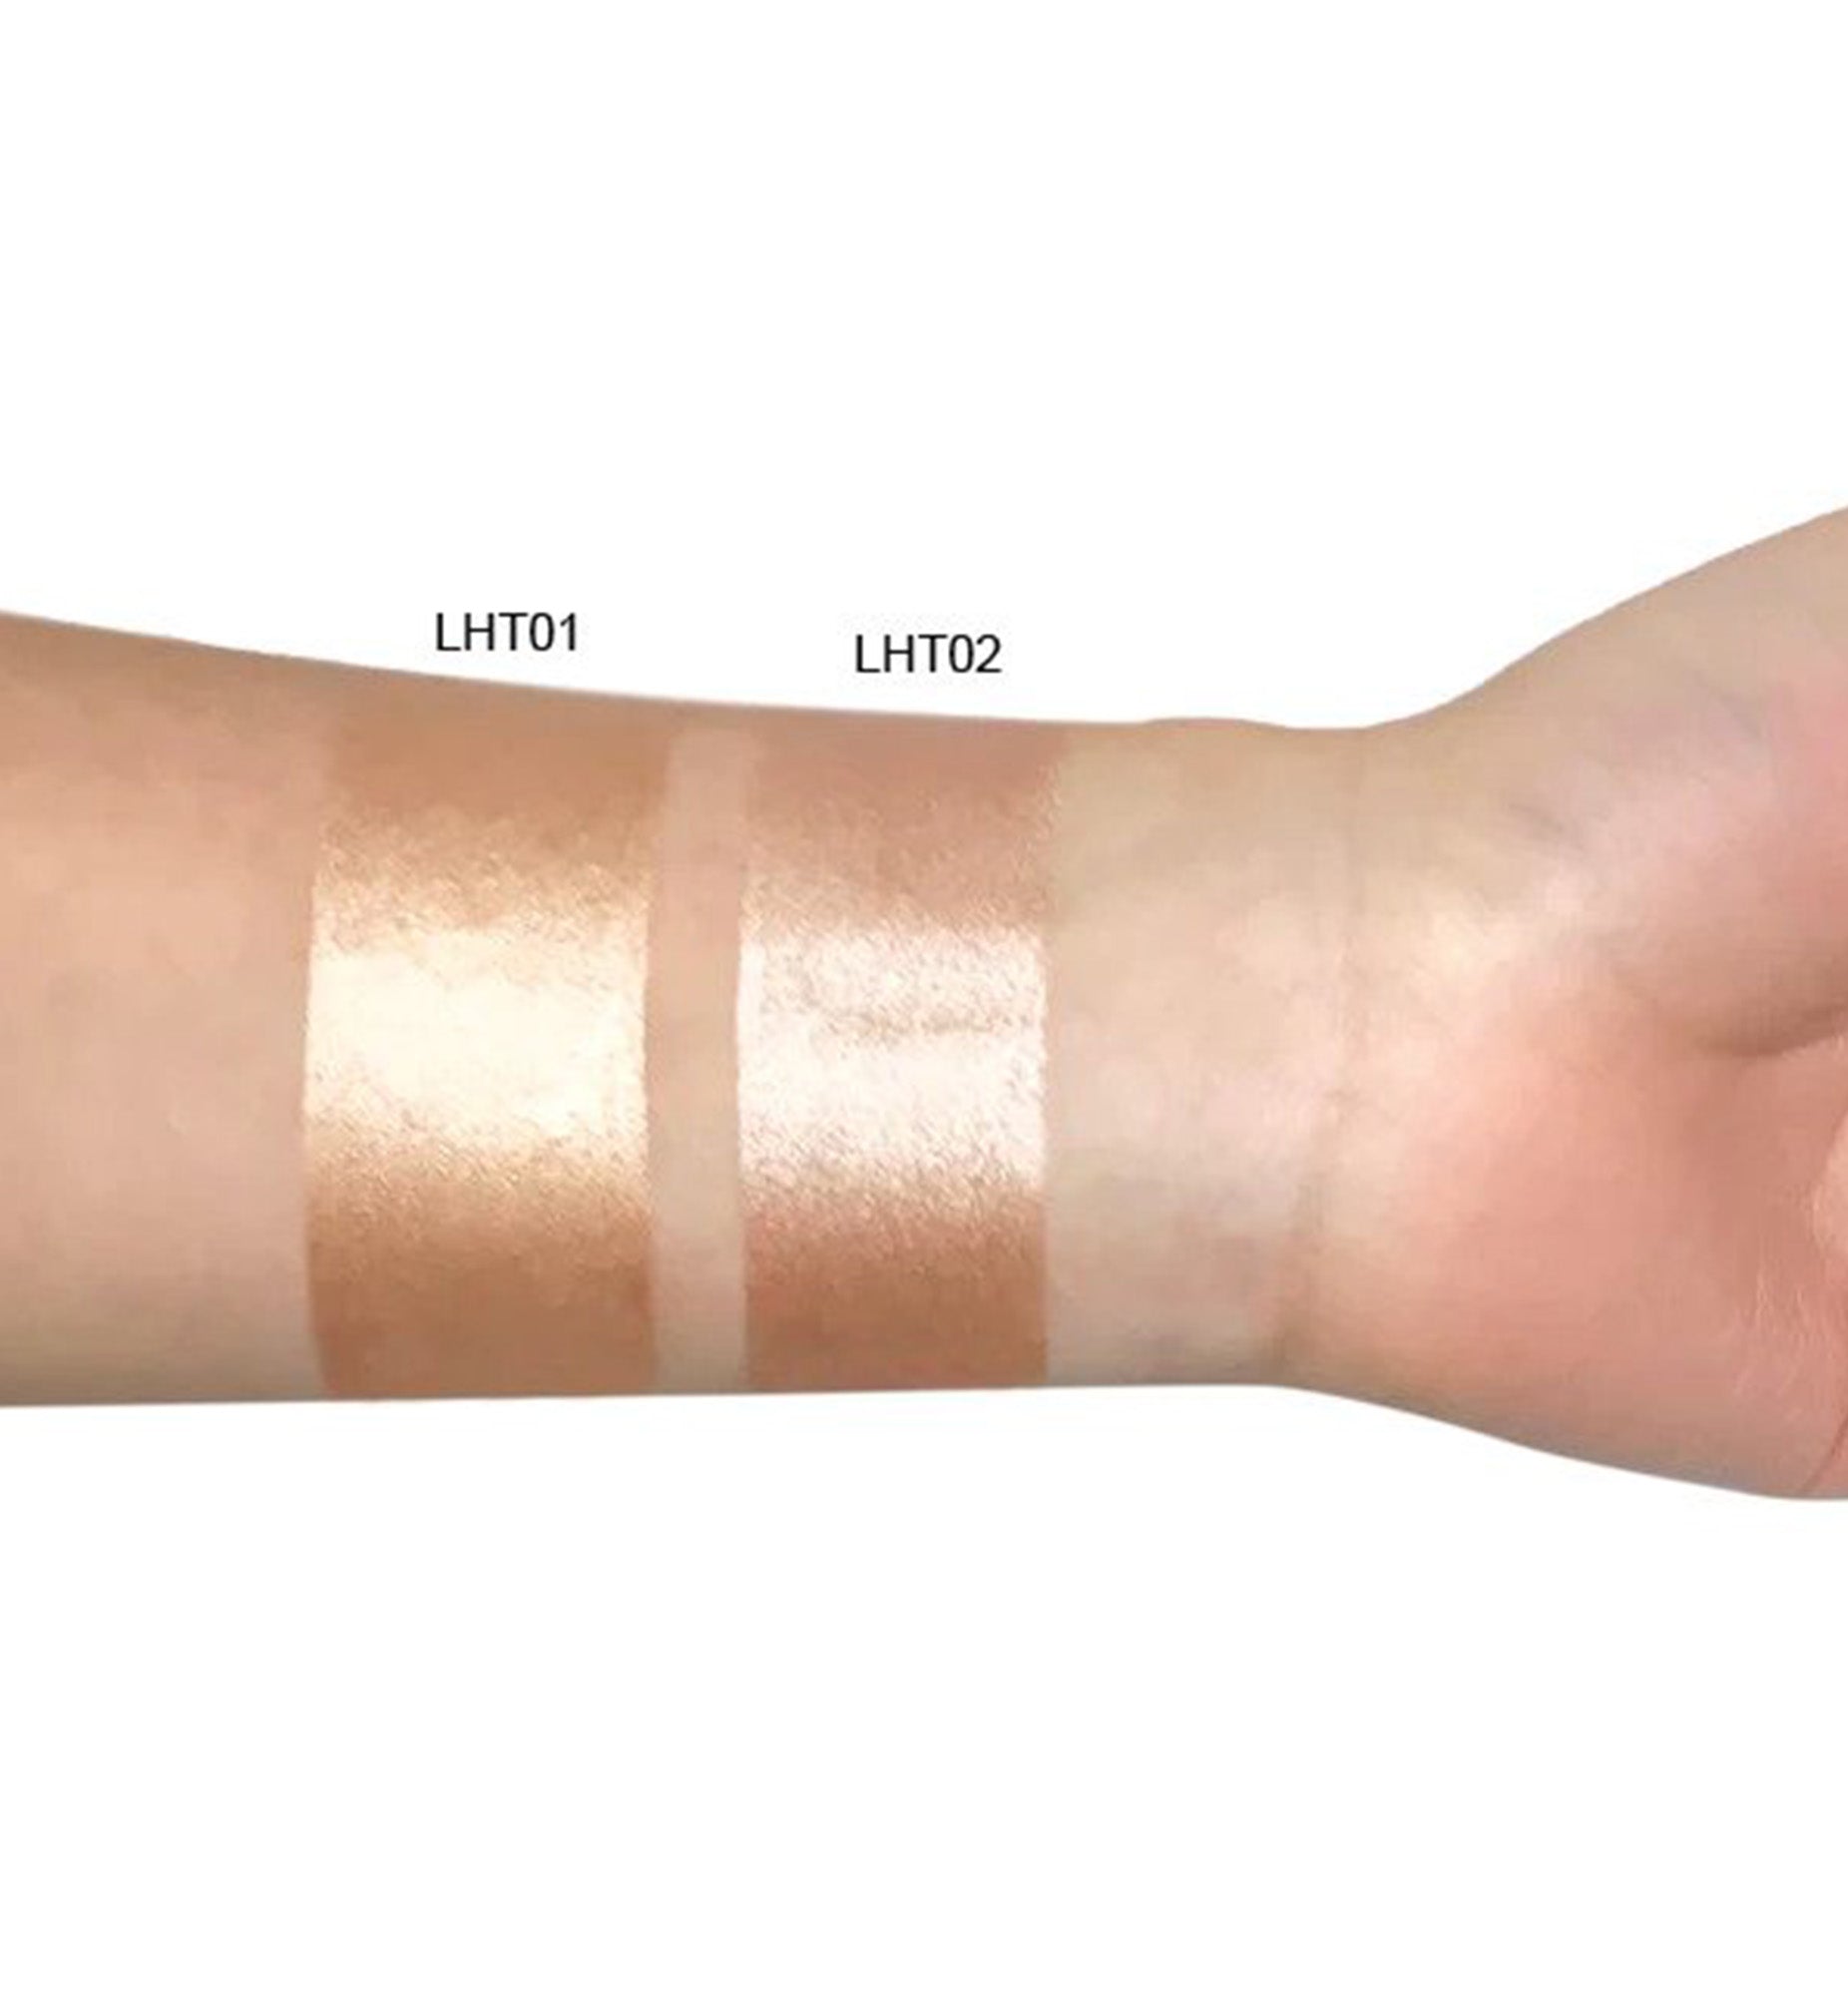 Cruisin Organics Rosy Liquid Highlighter offers buildable coverage and a radiant, transfer-proof finish for luminous skin.